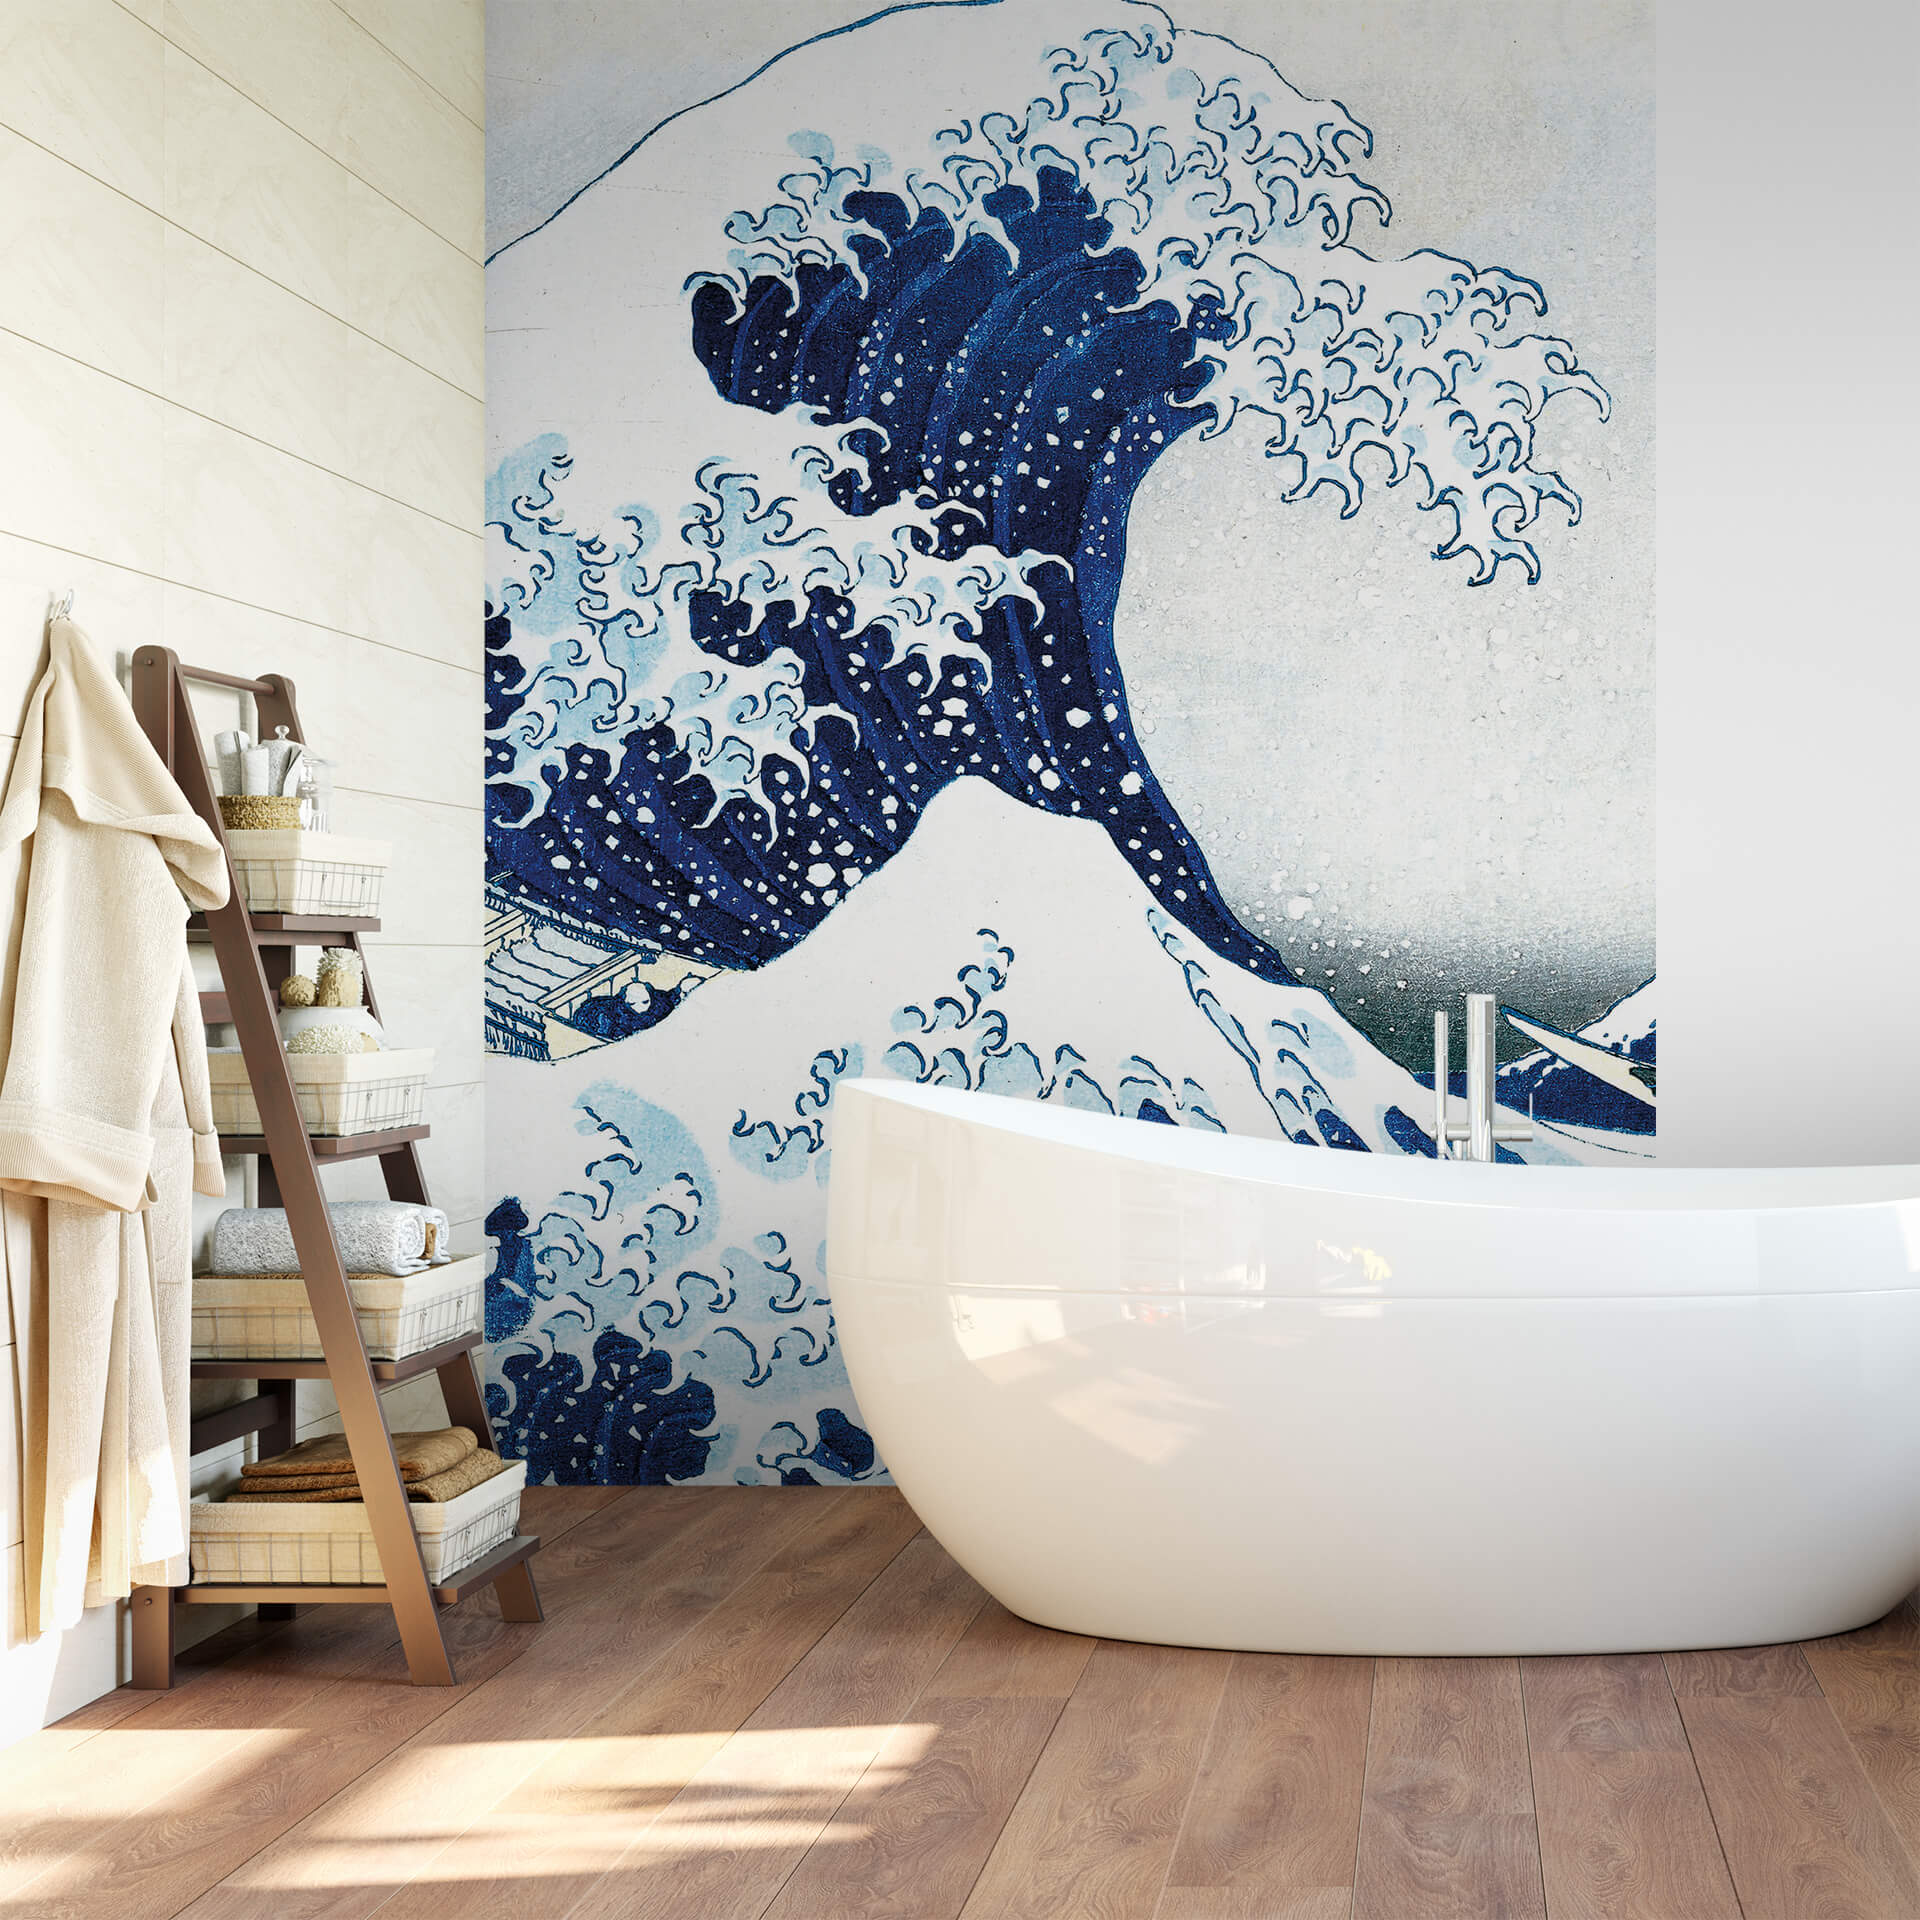 Free download the great wave off kanagawa wallpaper image search results  900x603 for your Desktop Mobile  Tablet  Explore 43 Great Wave Off  Kanagawa Wallpaper  The Great Wave Off Kanagawa